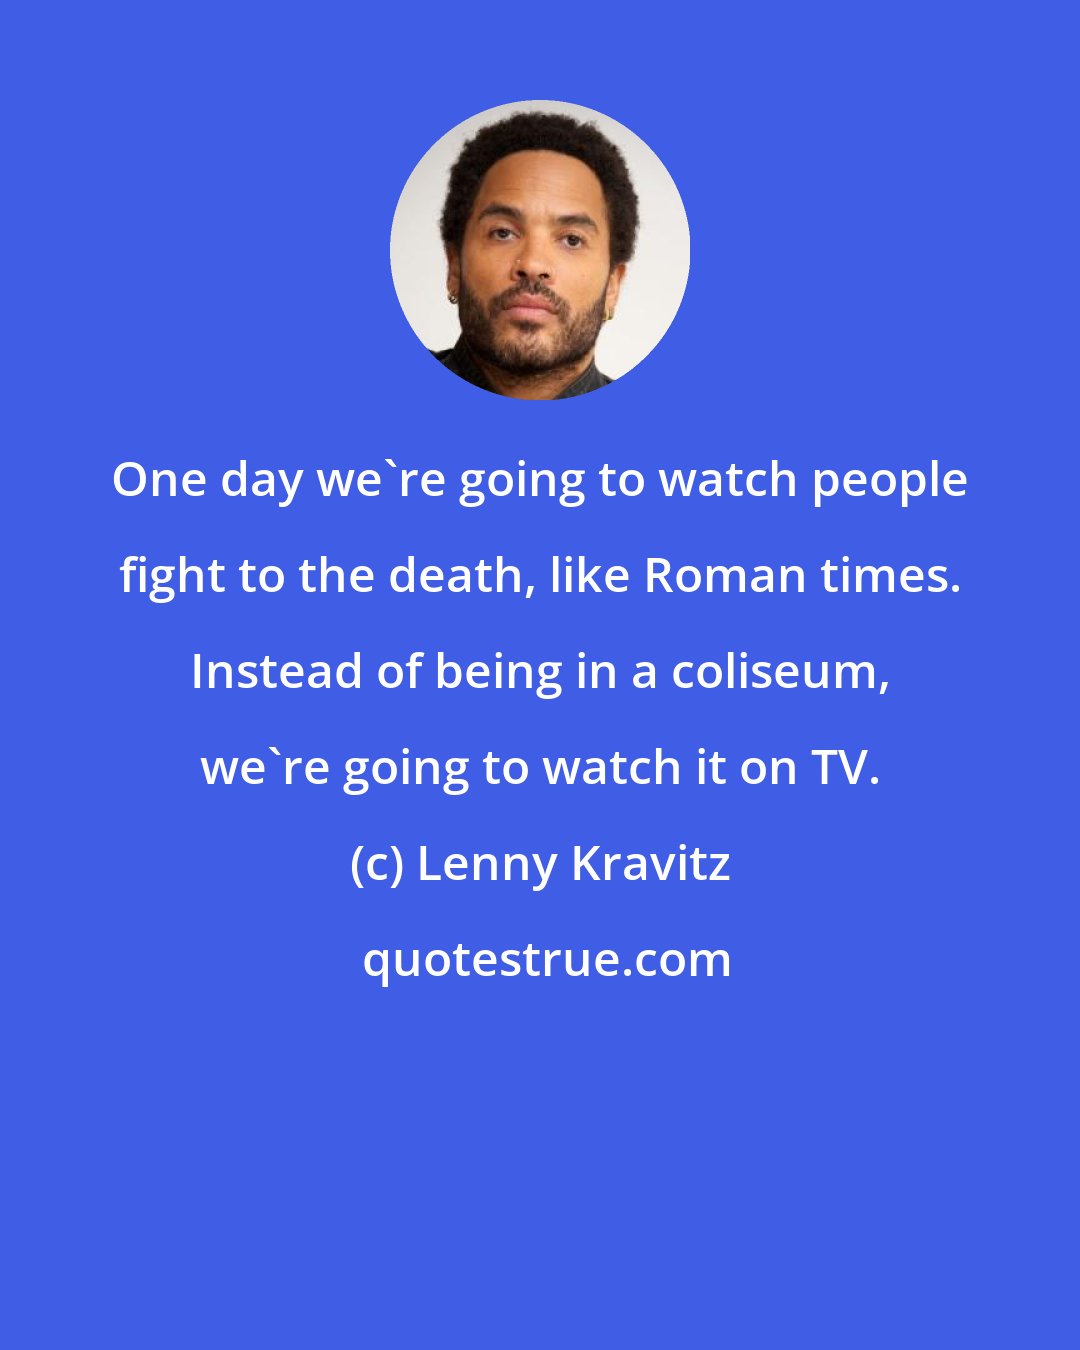 Lenny Kravitz: One day we're going to watch people fight to the death, like Roman times. Instead of being in a coliseum, we're going to watch it on TV.